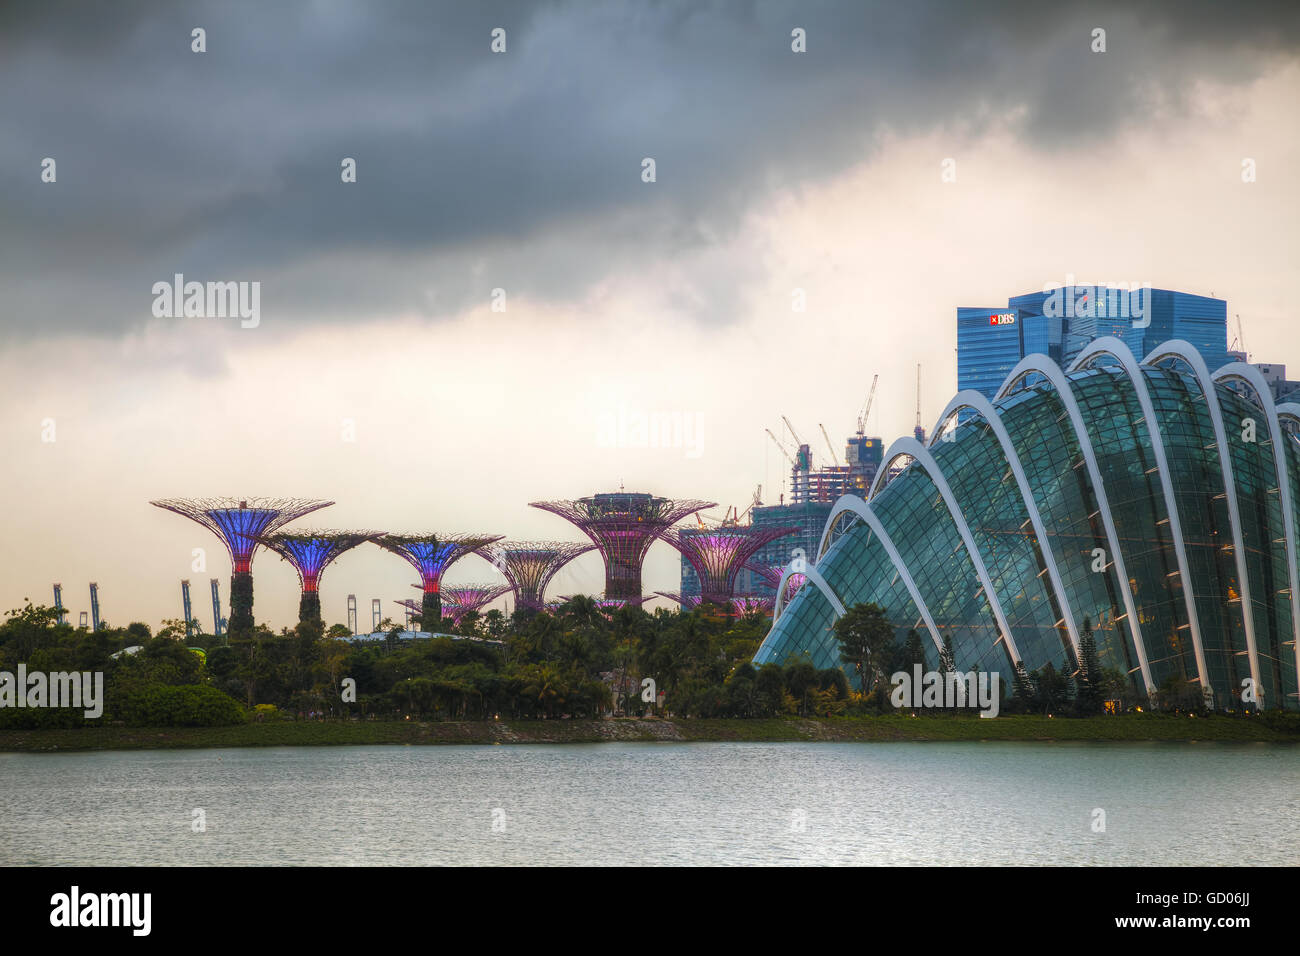 SINGAPORE - NOVEMBER 7: Overview of Singapore with the Marina Bay Sands on November 7, 2015 in Singapore. Stock Photo